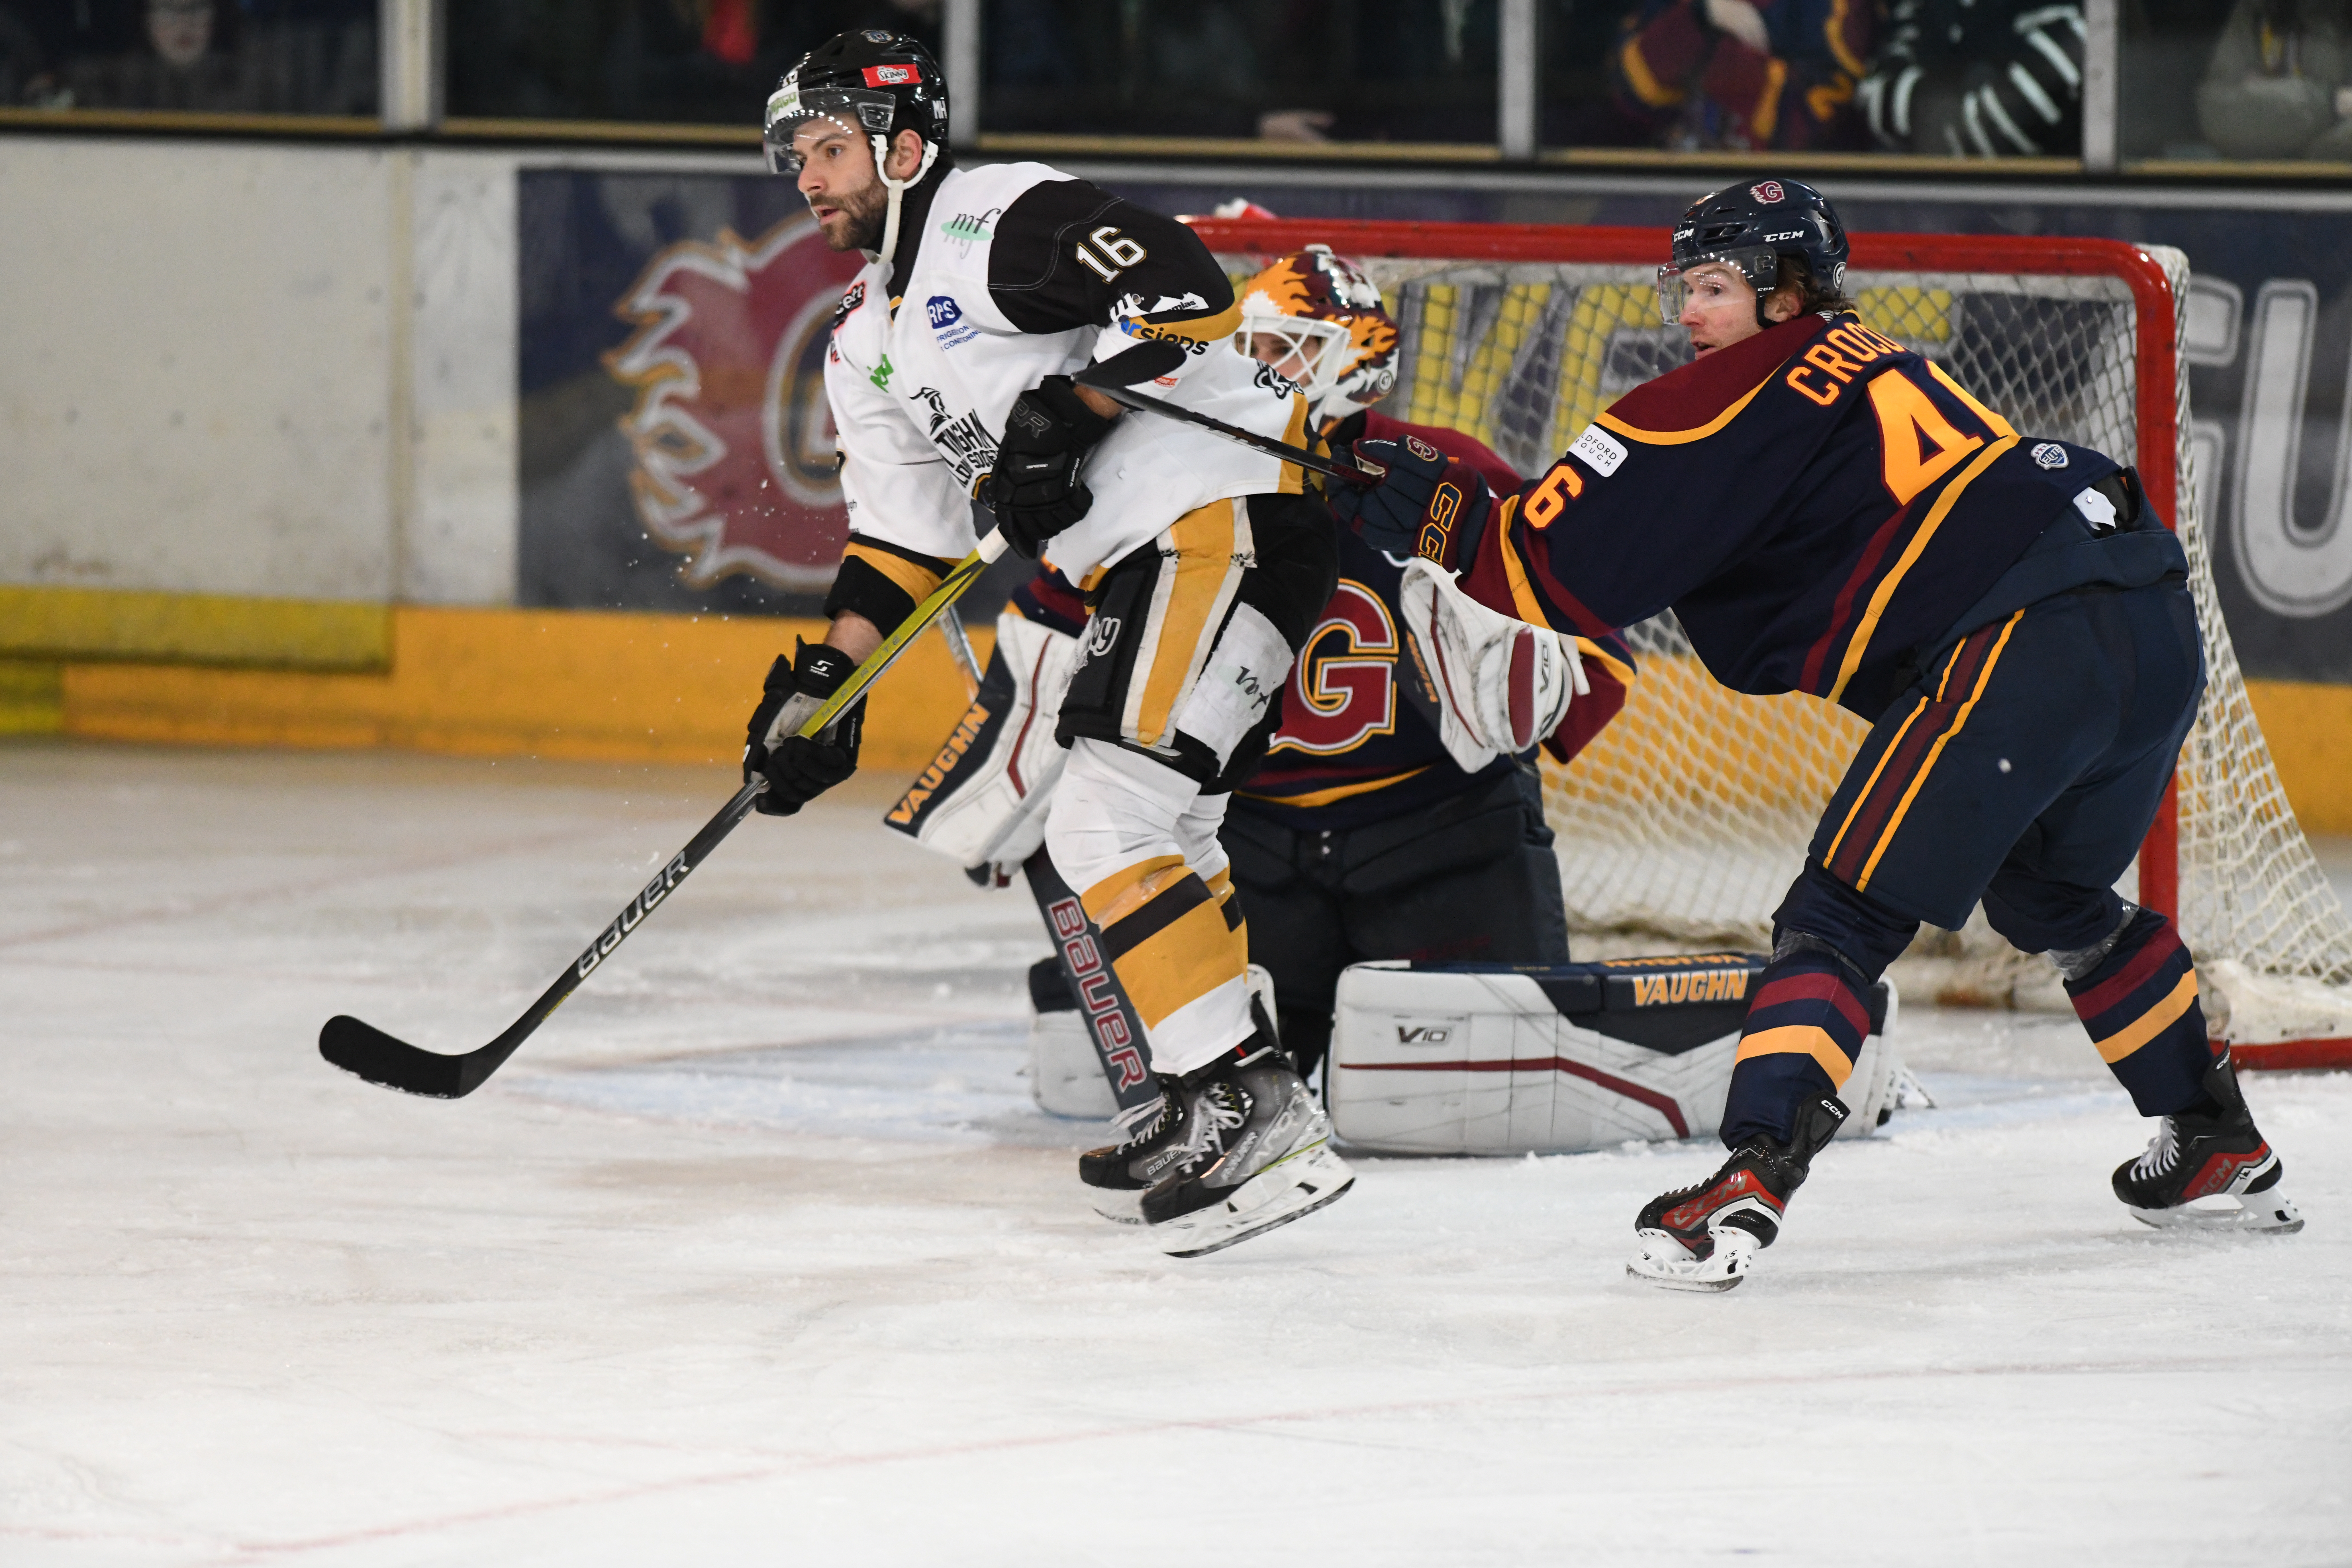 MATCH REPORT: GUILDFORD 6-2 PANTHERS Top Image